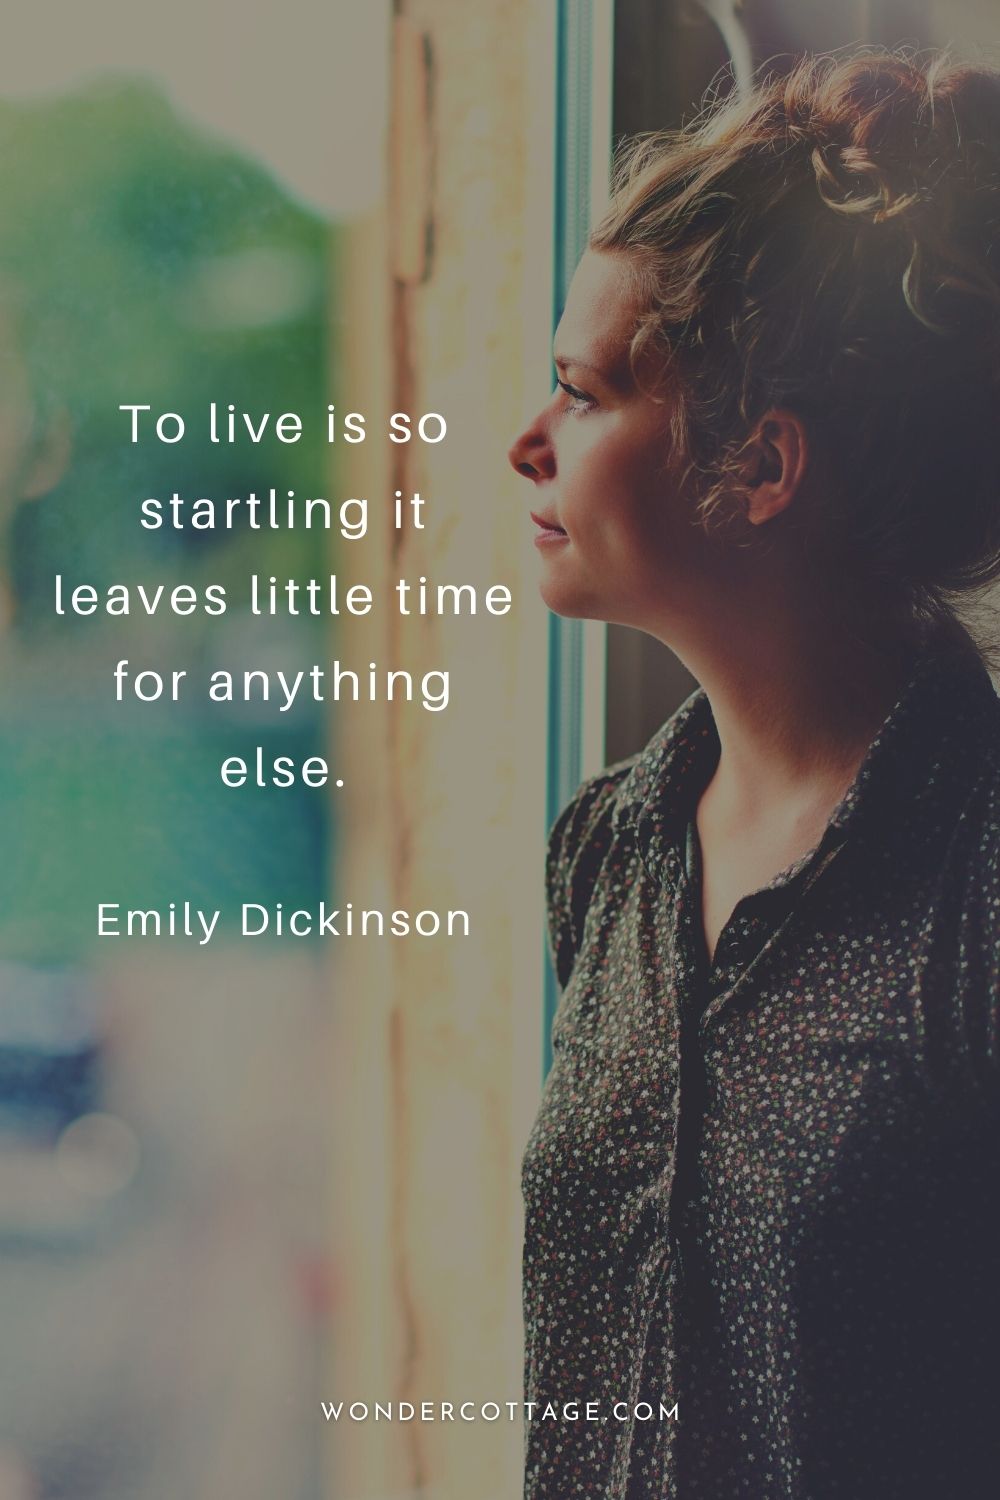 To live is so startling it leaves little time for anything else. Emily Dickinson